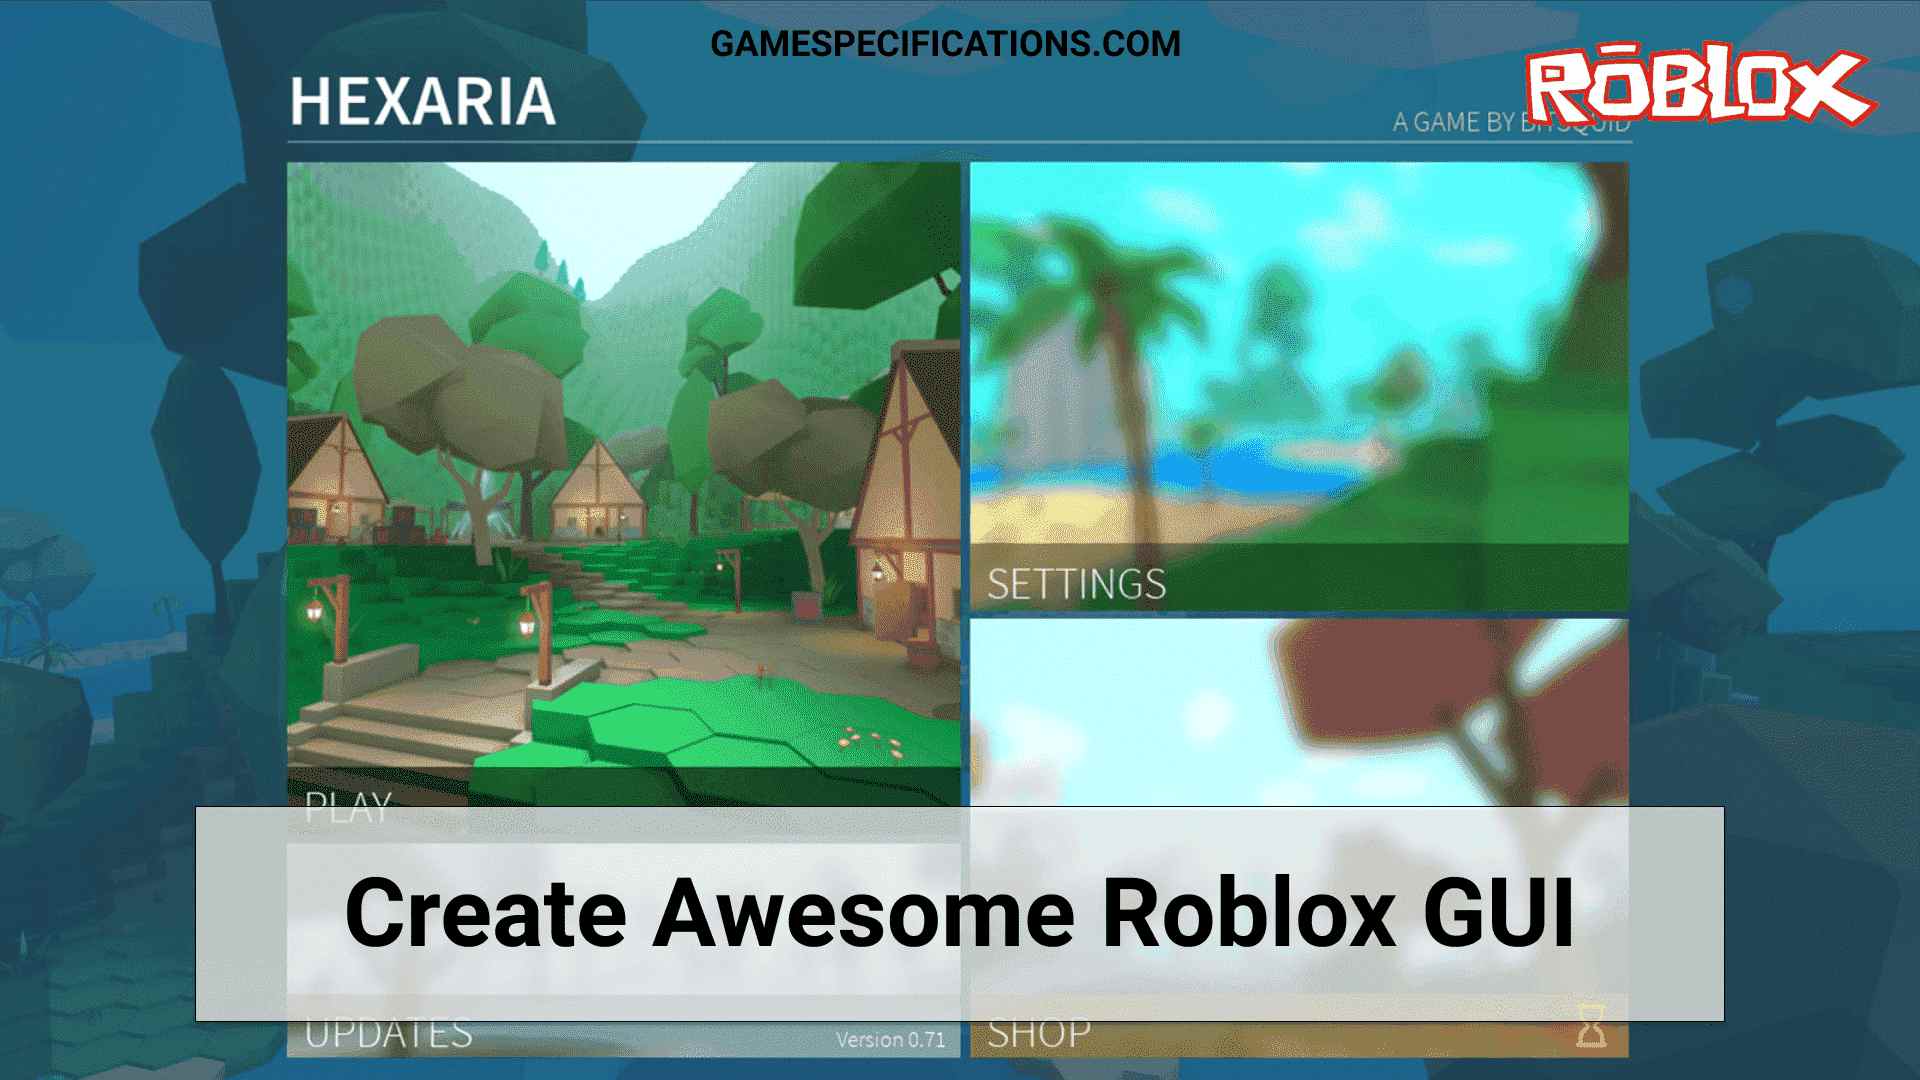 Roblox Gui All In One Guide To Create An Awesome Gui Game Specifications - roblox gui for games